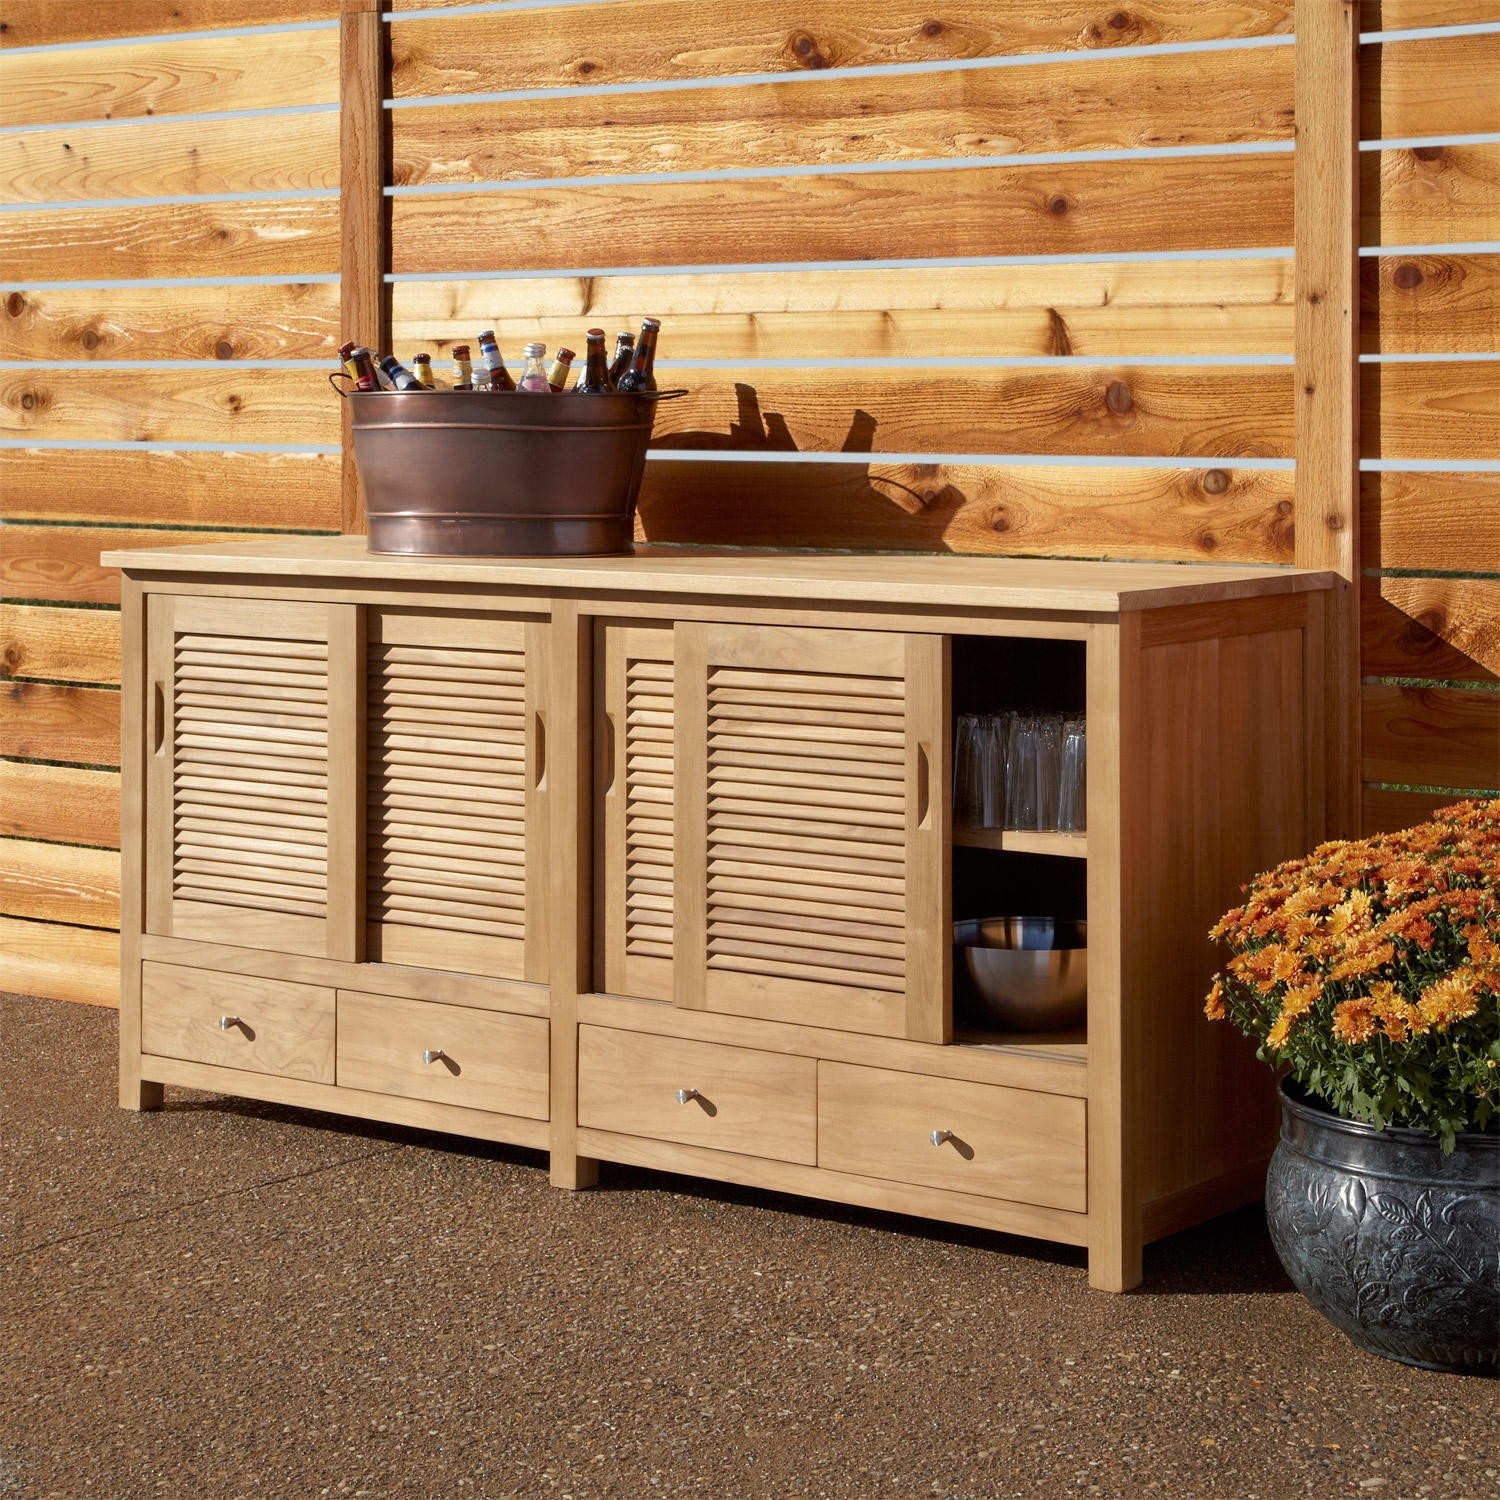 Outdoor Cabinets Kitchen
 The Various Re mendations and Ideas of the Materials of